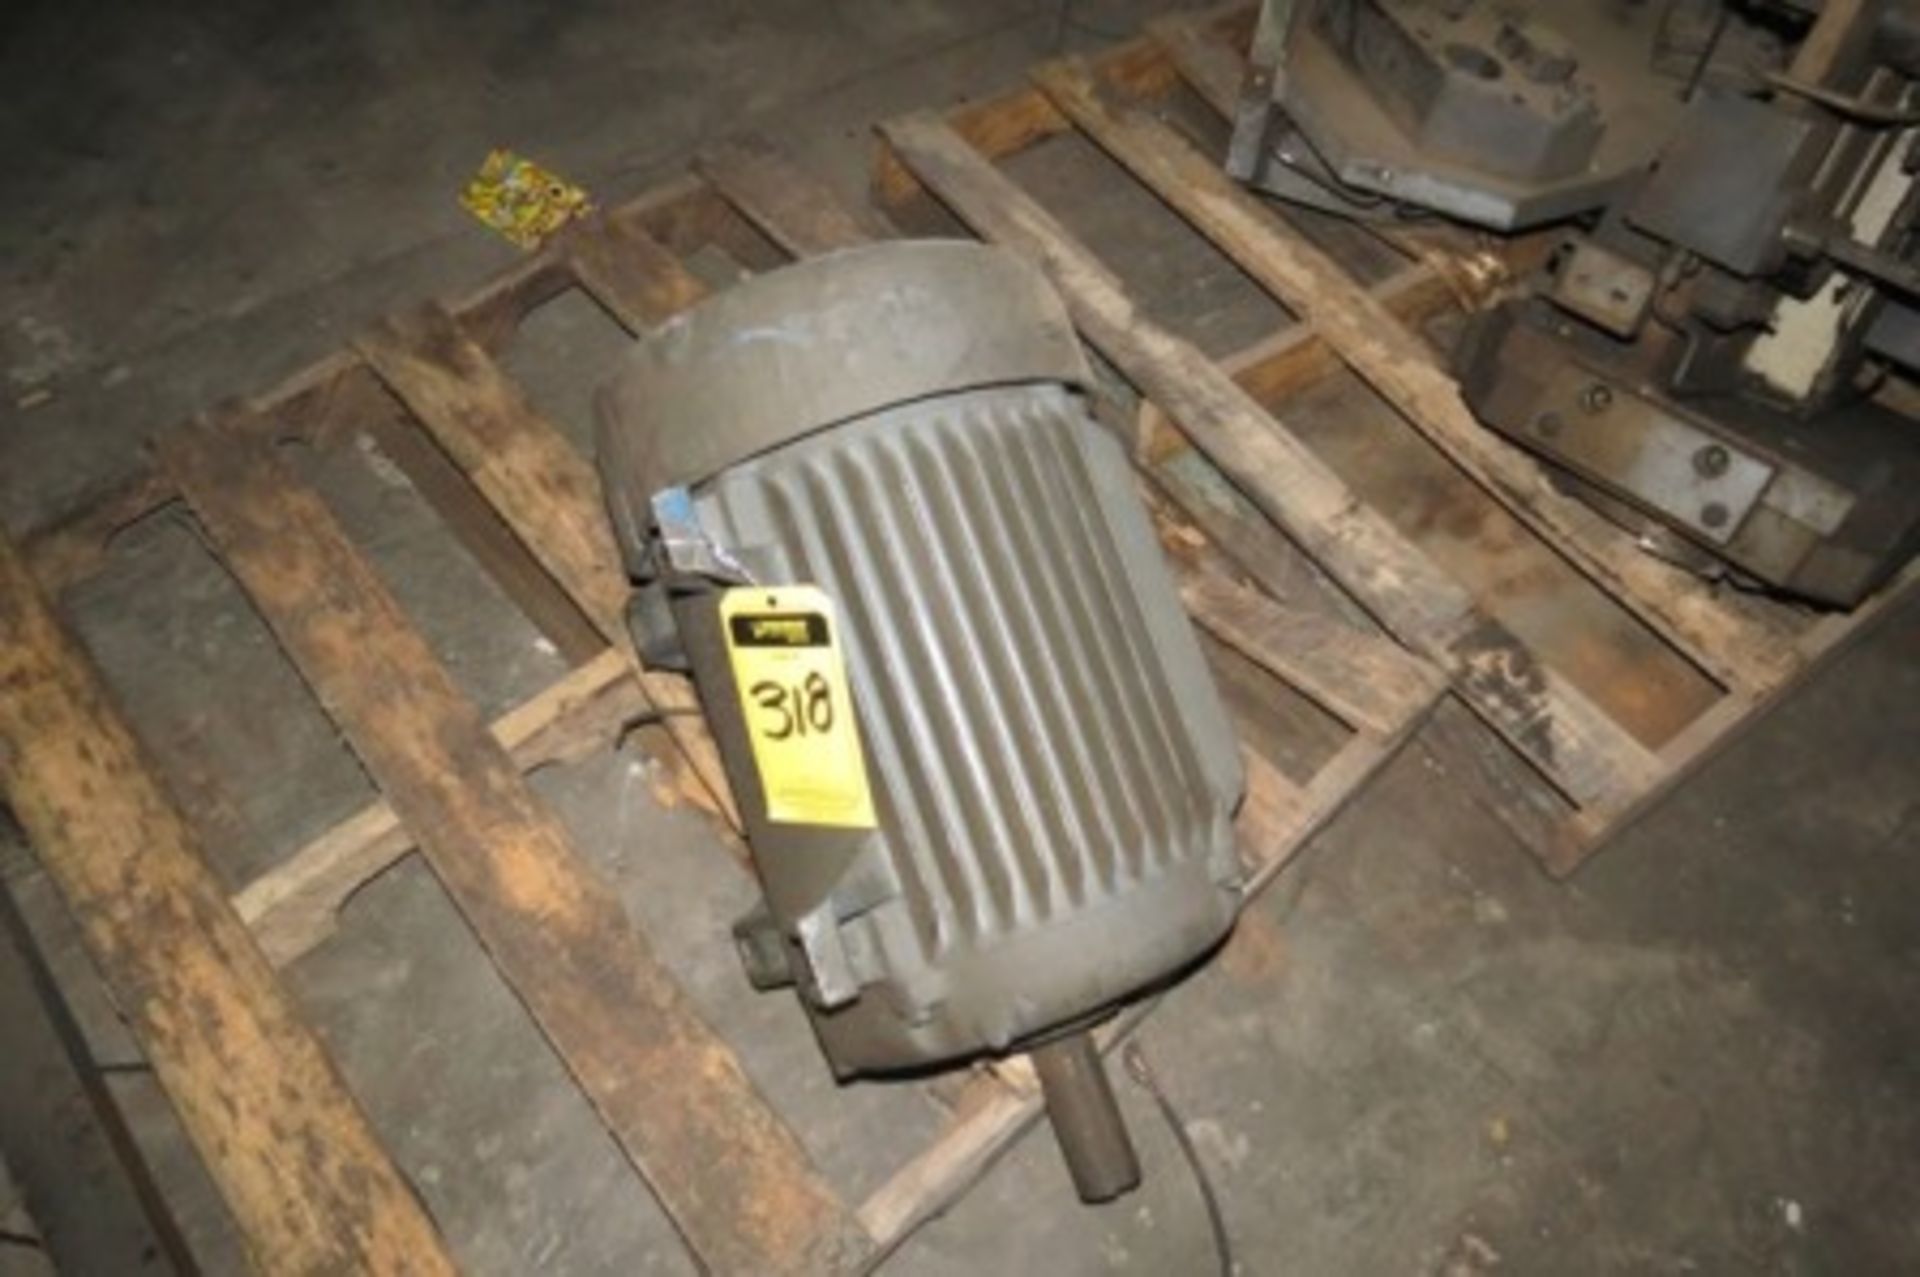 Electric motor 50 hp. Spare parts for die casting machines. Belt conveyor